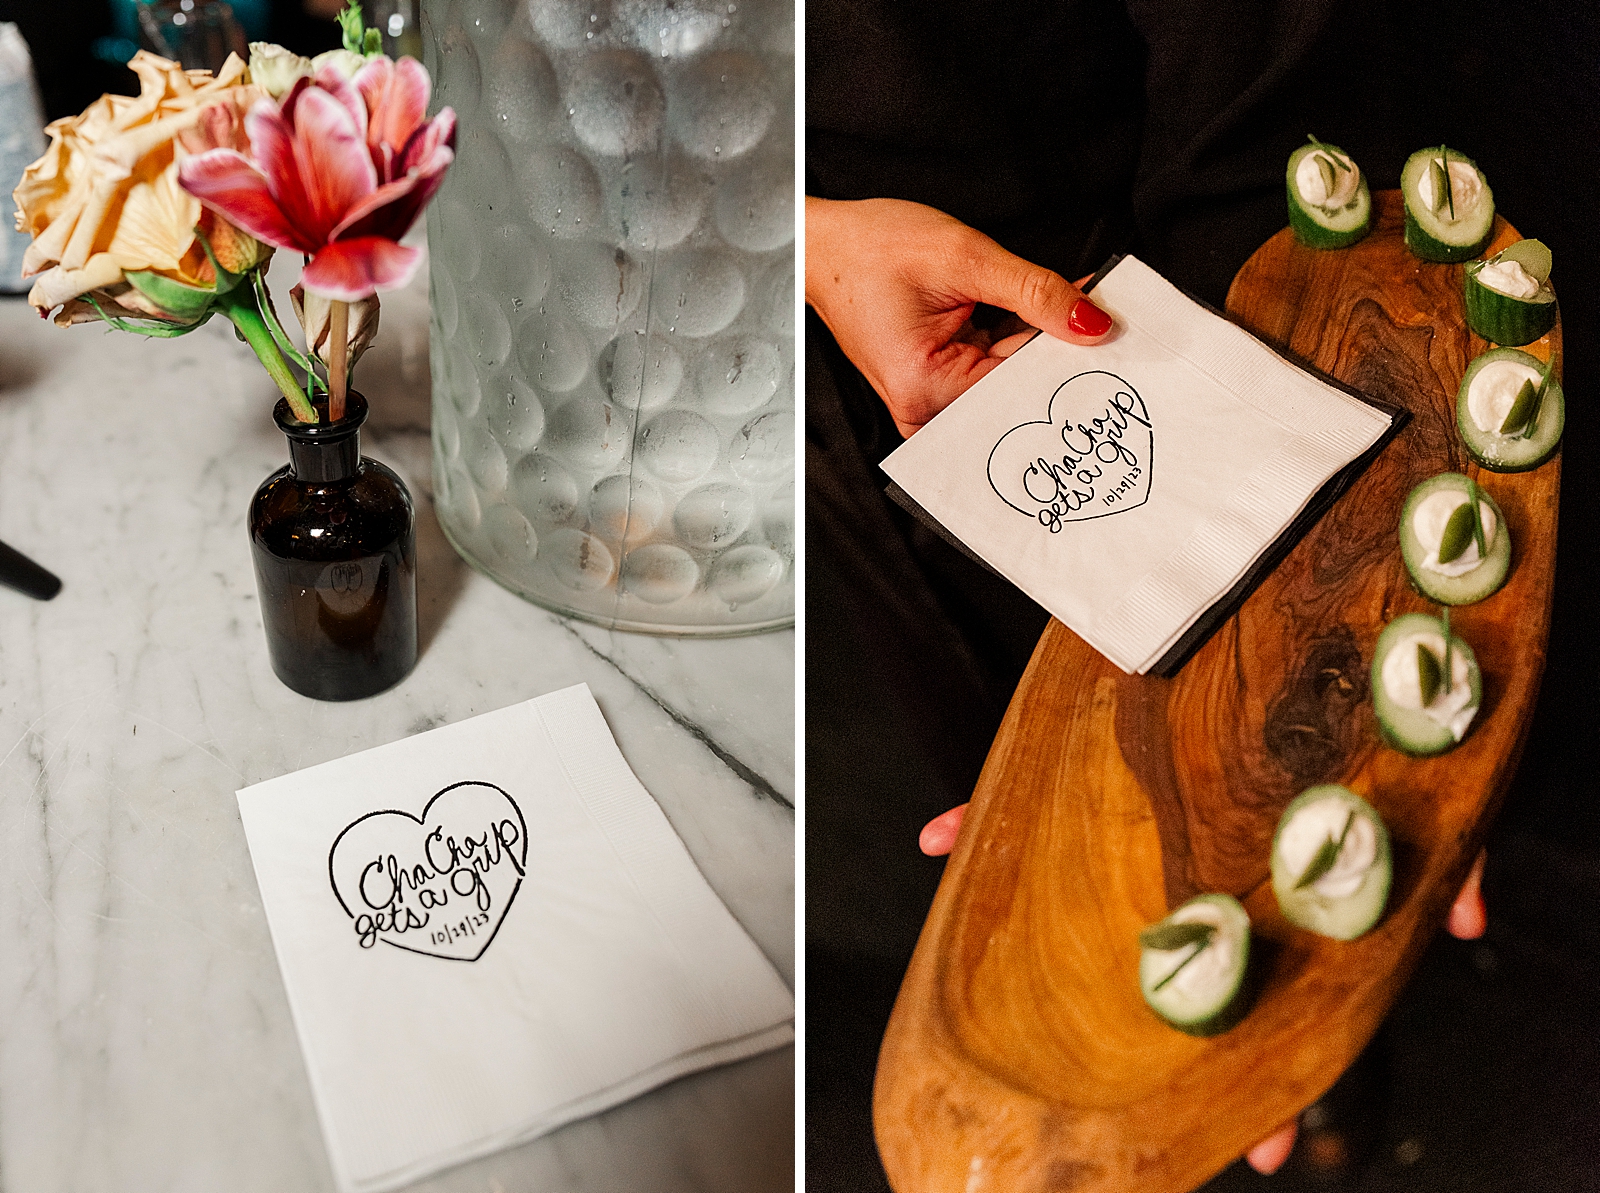 Left photo: Shot of the couple's custom cocktail napkins which say, "Cha Cha gets a grip." 
Right photo: Shot of a custom cocktail napkin being presented with hors d'oeuvres. 